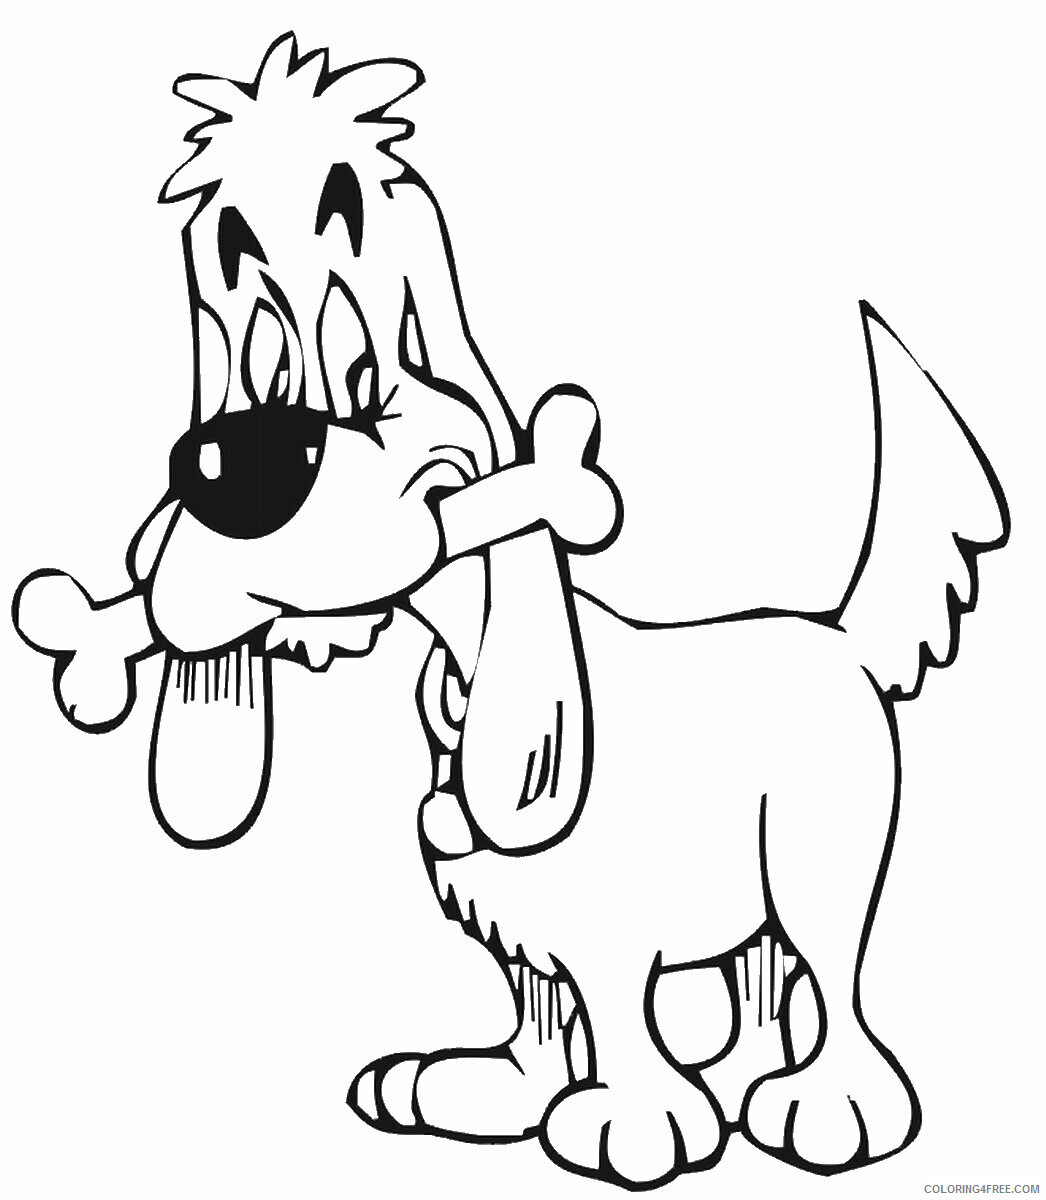 Dogs Coloring Pages Animal Printable Sheets dog_04 2021 1547 Coloring4free